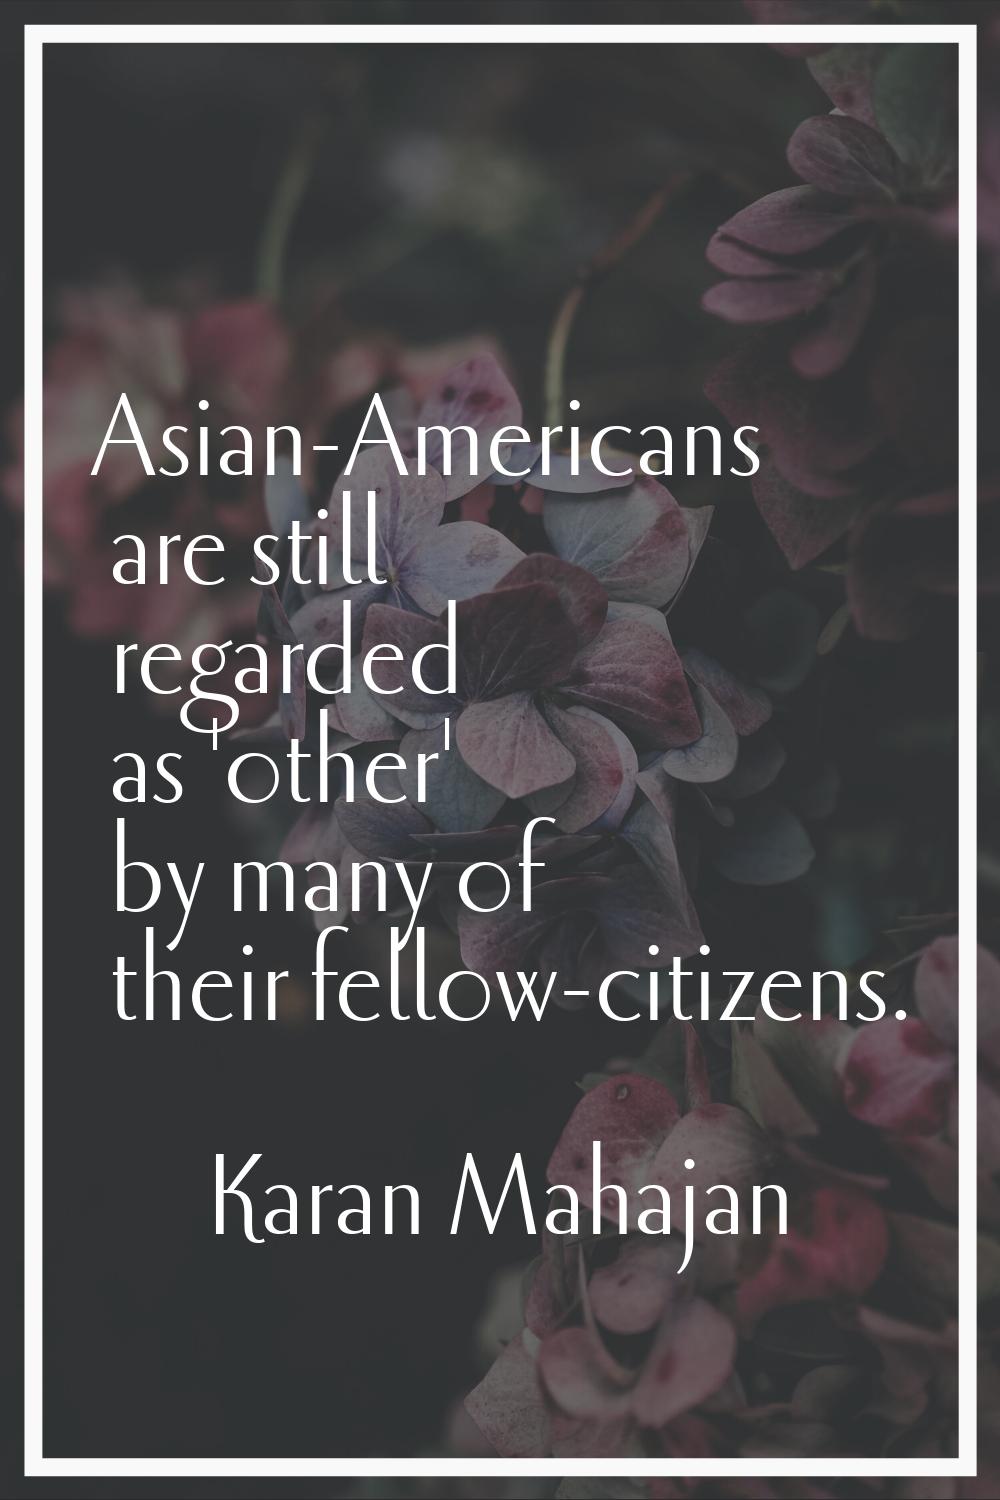 Asian-Americans are still regarded as 'other' by many of their fellow-citizens.